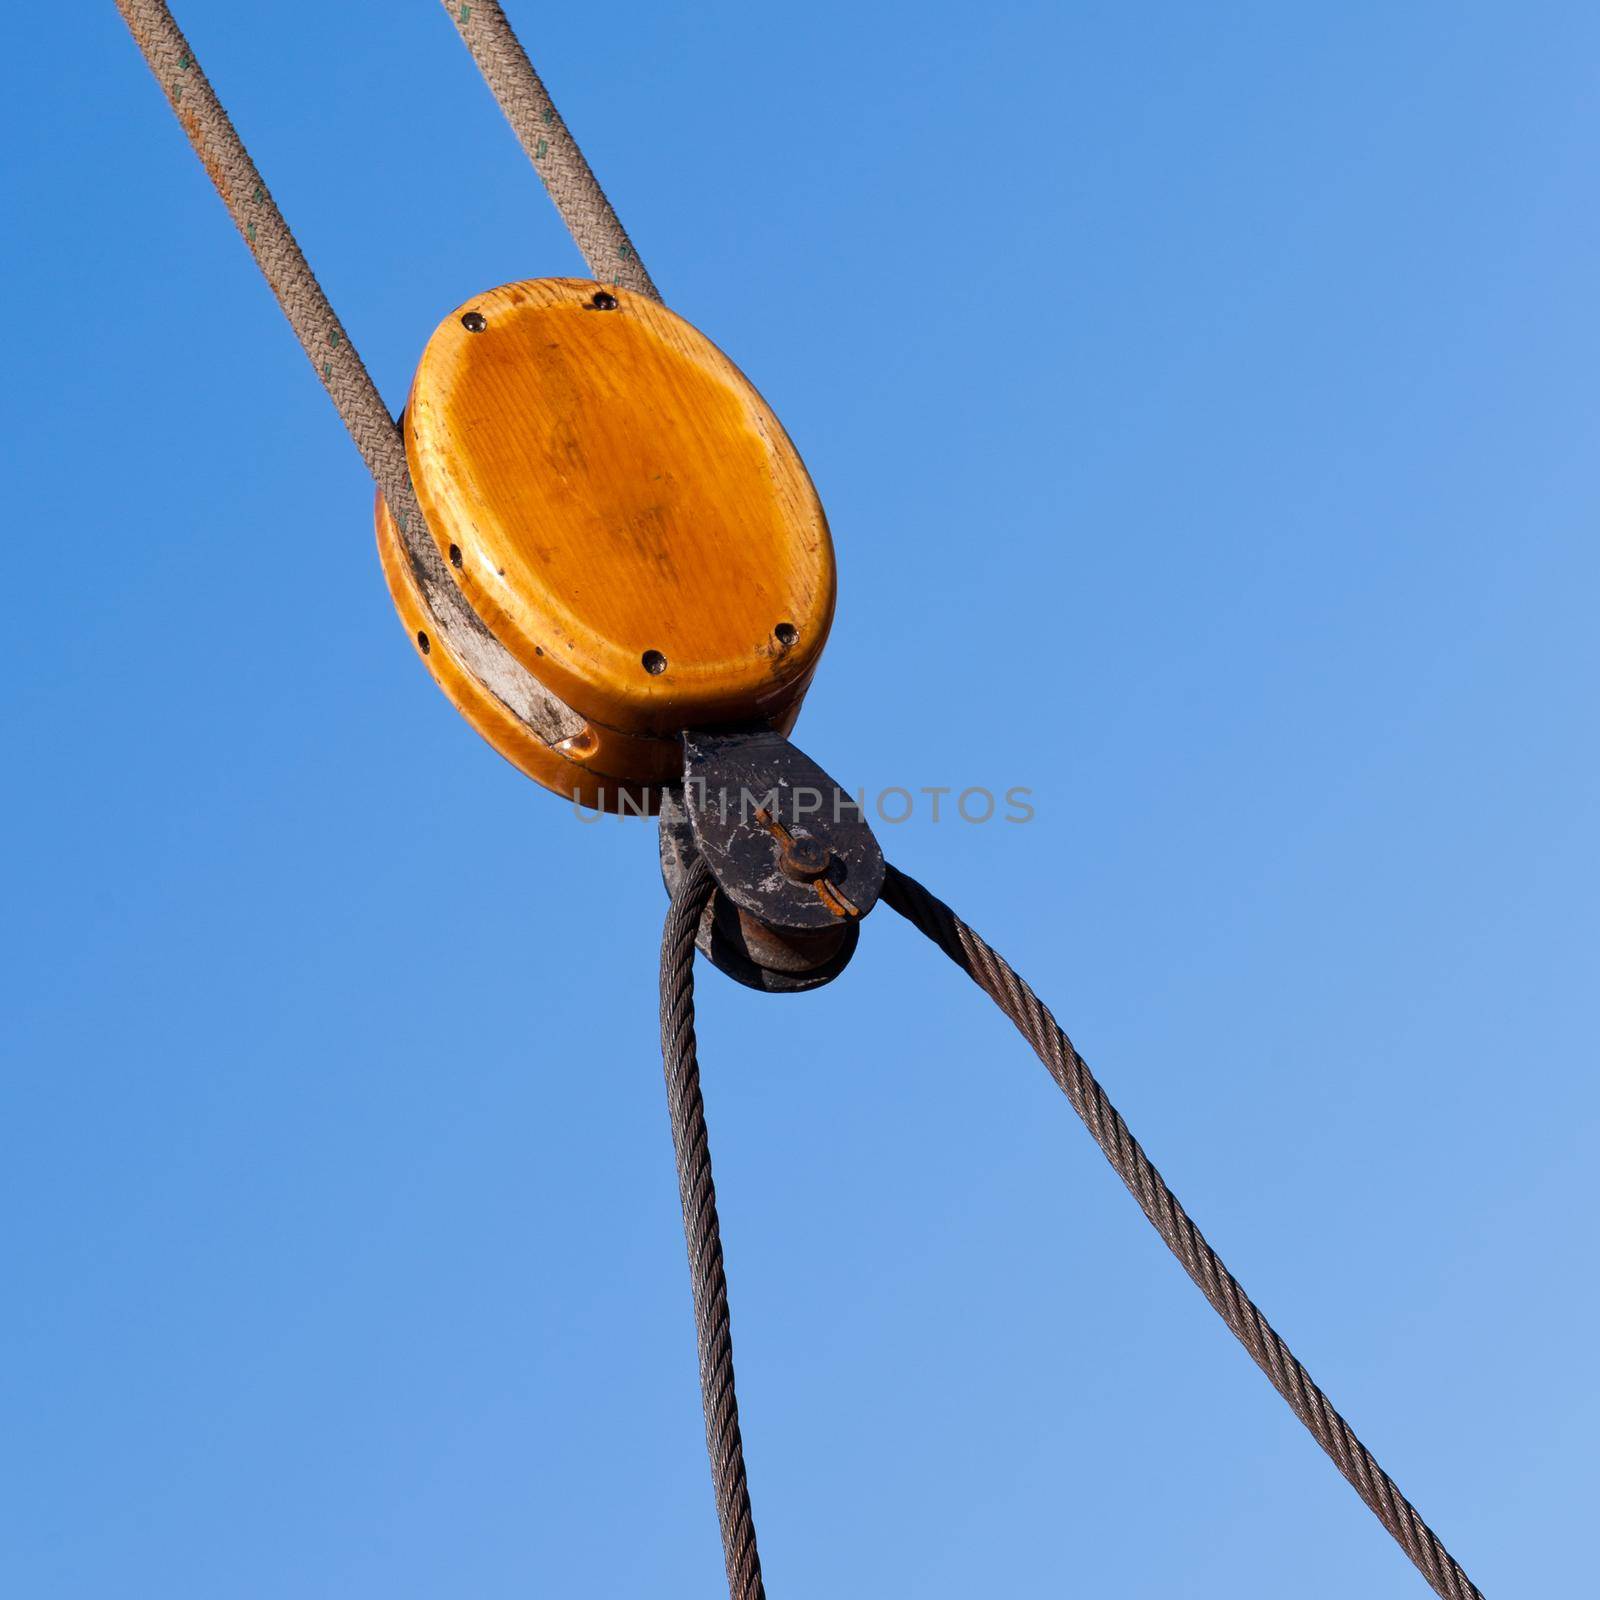 Wooden cable pulley rigging detail in blue sky by PiLens